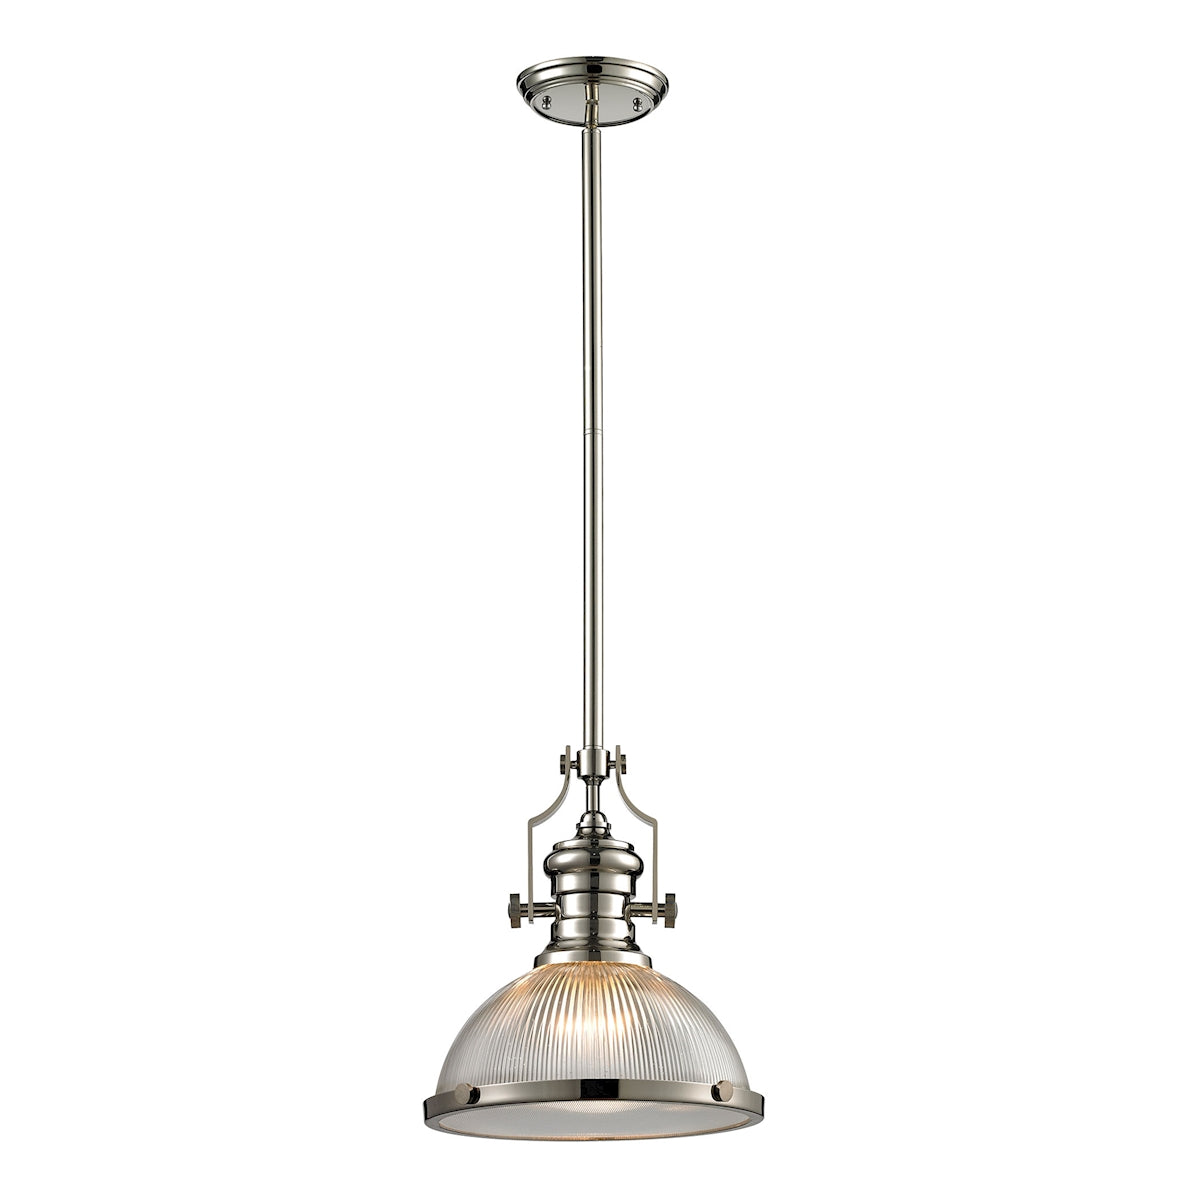 ELK Lighting 66513-1 Chadwick 1-Light Pendant in Polished Nickel with Matching Shade